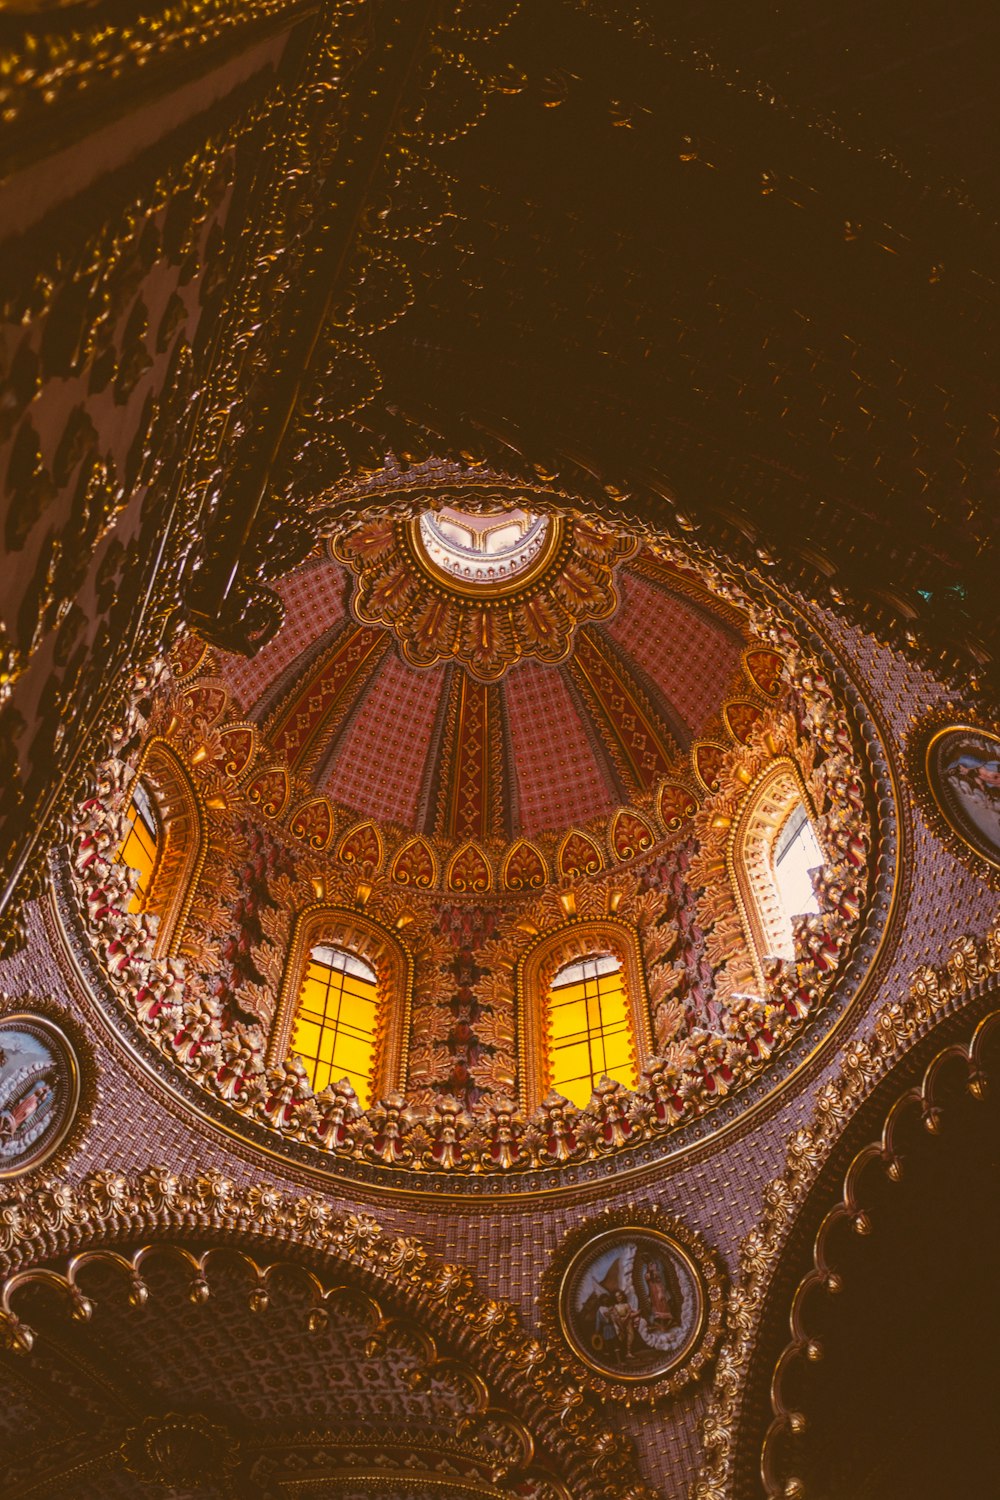 the ceiling of a building with a dome and stained glass windows